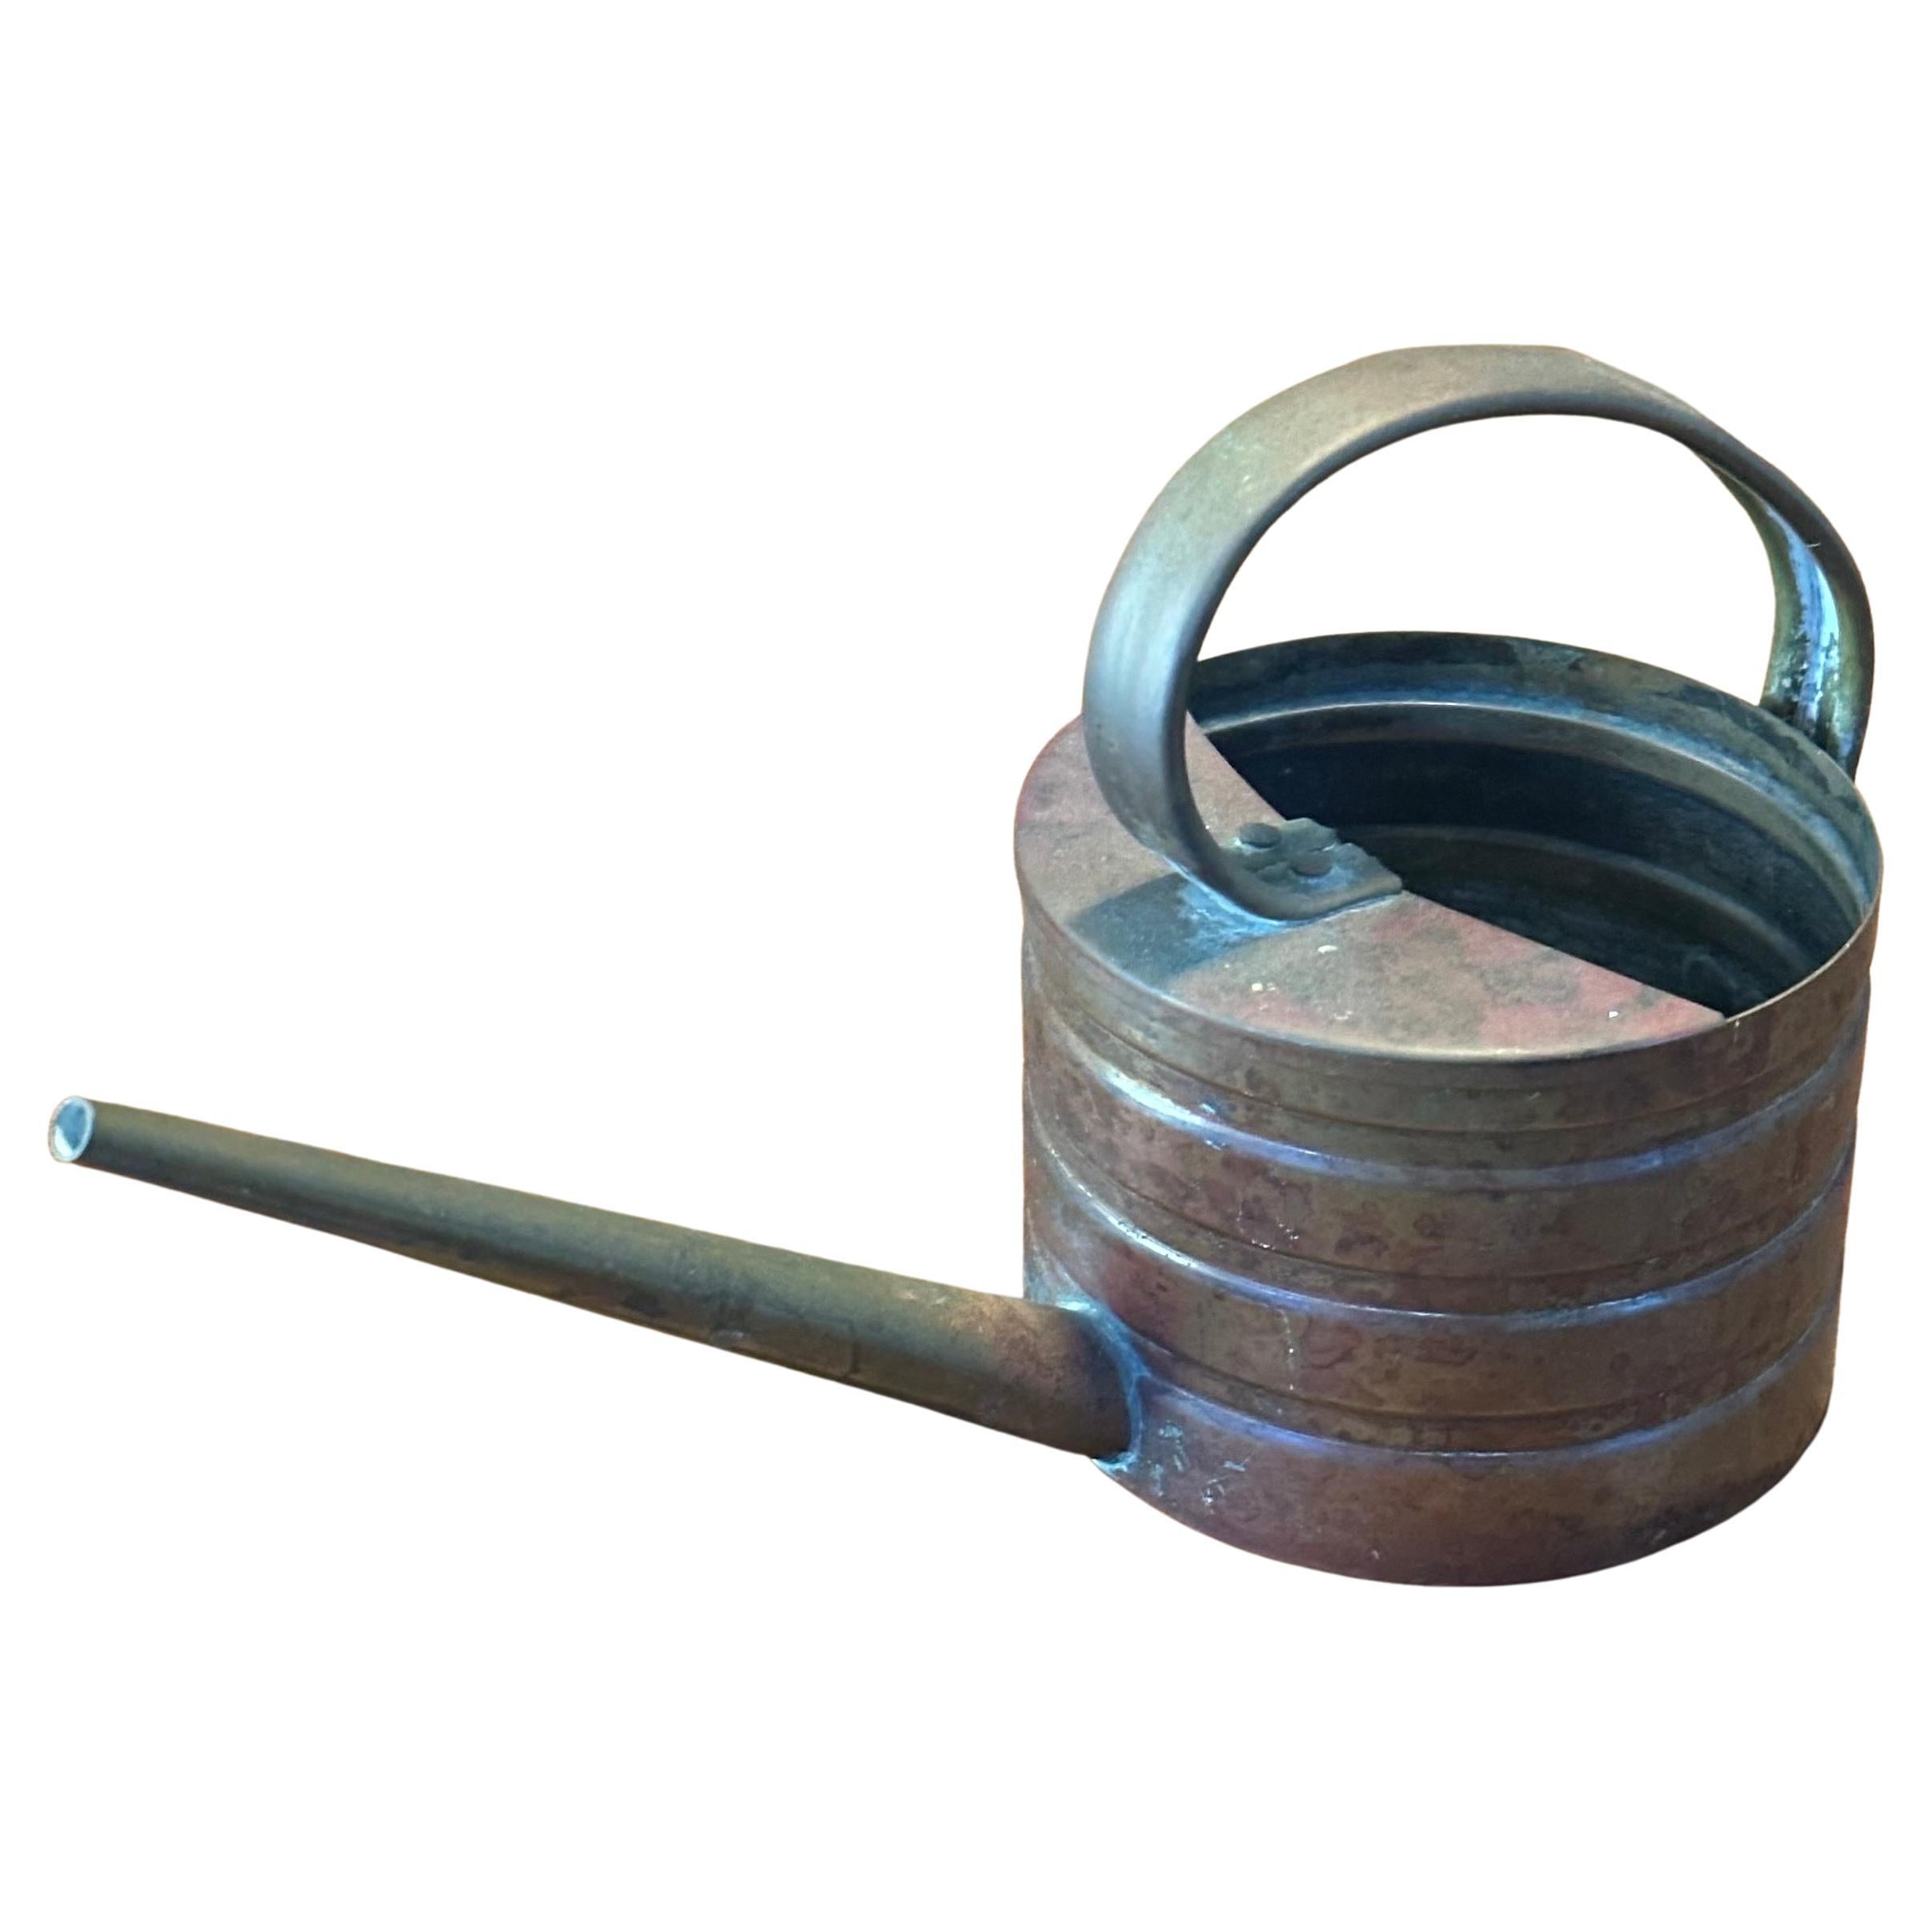 A charming mid-century modern copper and brass watering can, circa 1960s. The small can is in good vintage condition and measures 3.75